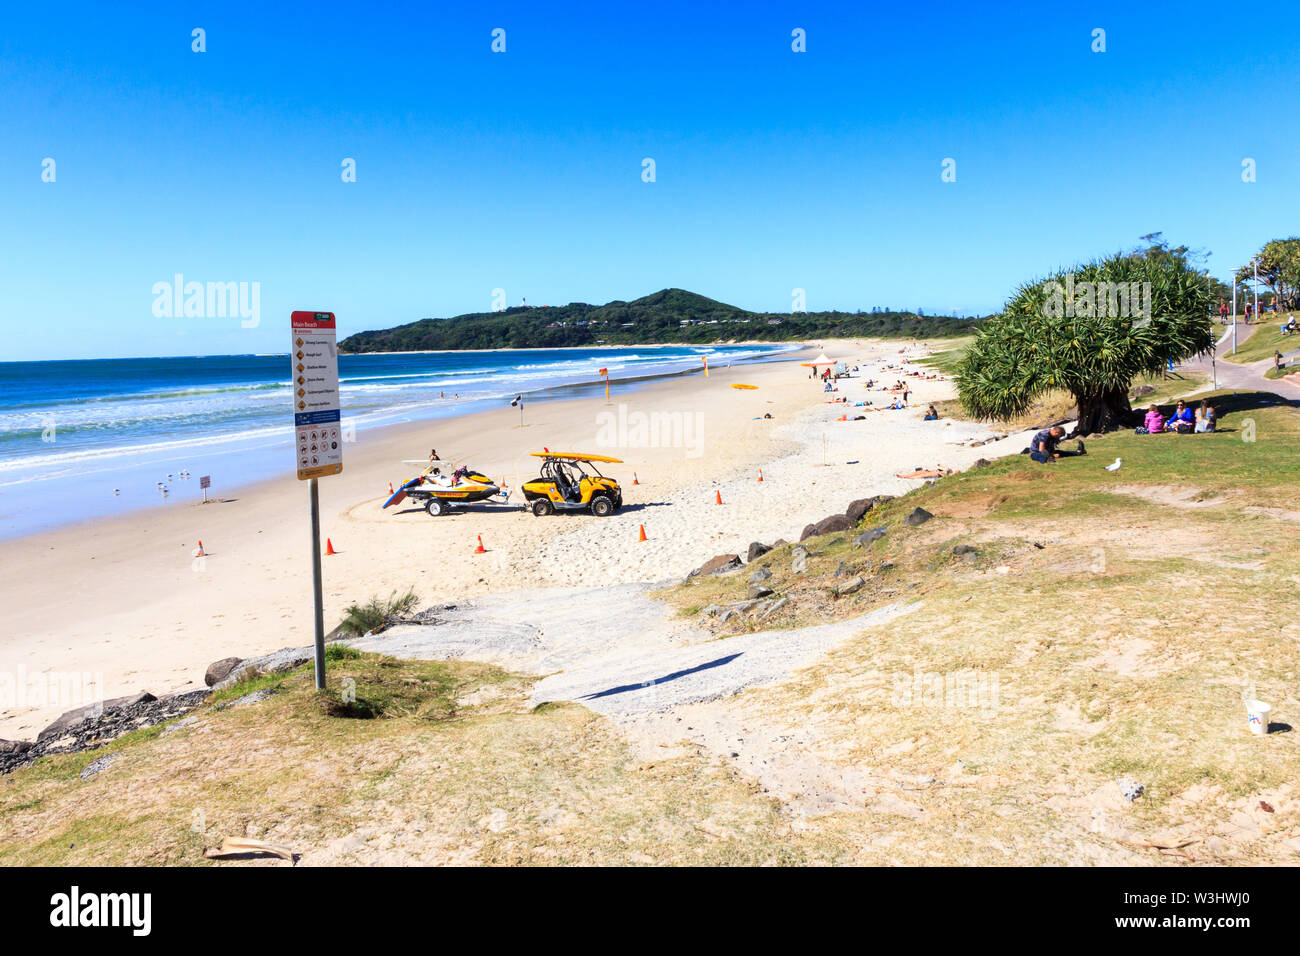 Byron Bay, Australia - 14th May 2015: People sitting on grass and the beach. The area is popular with young people. Stock Photo